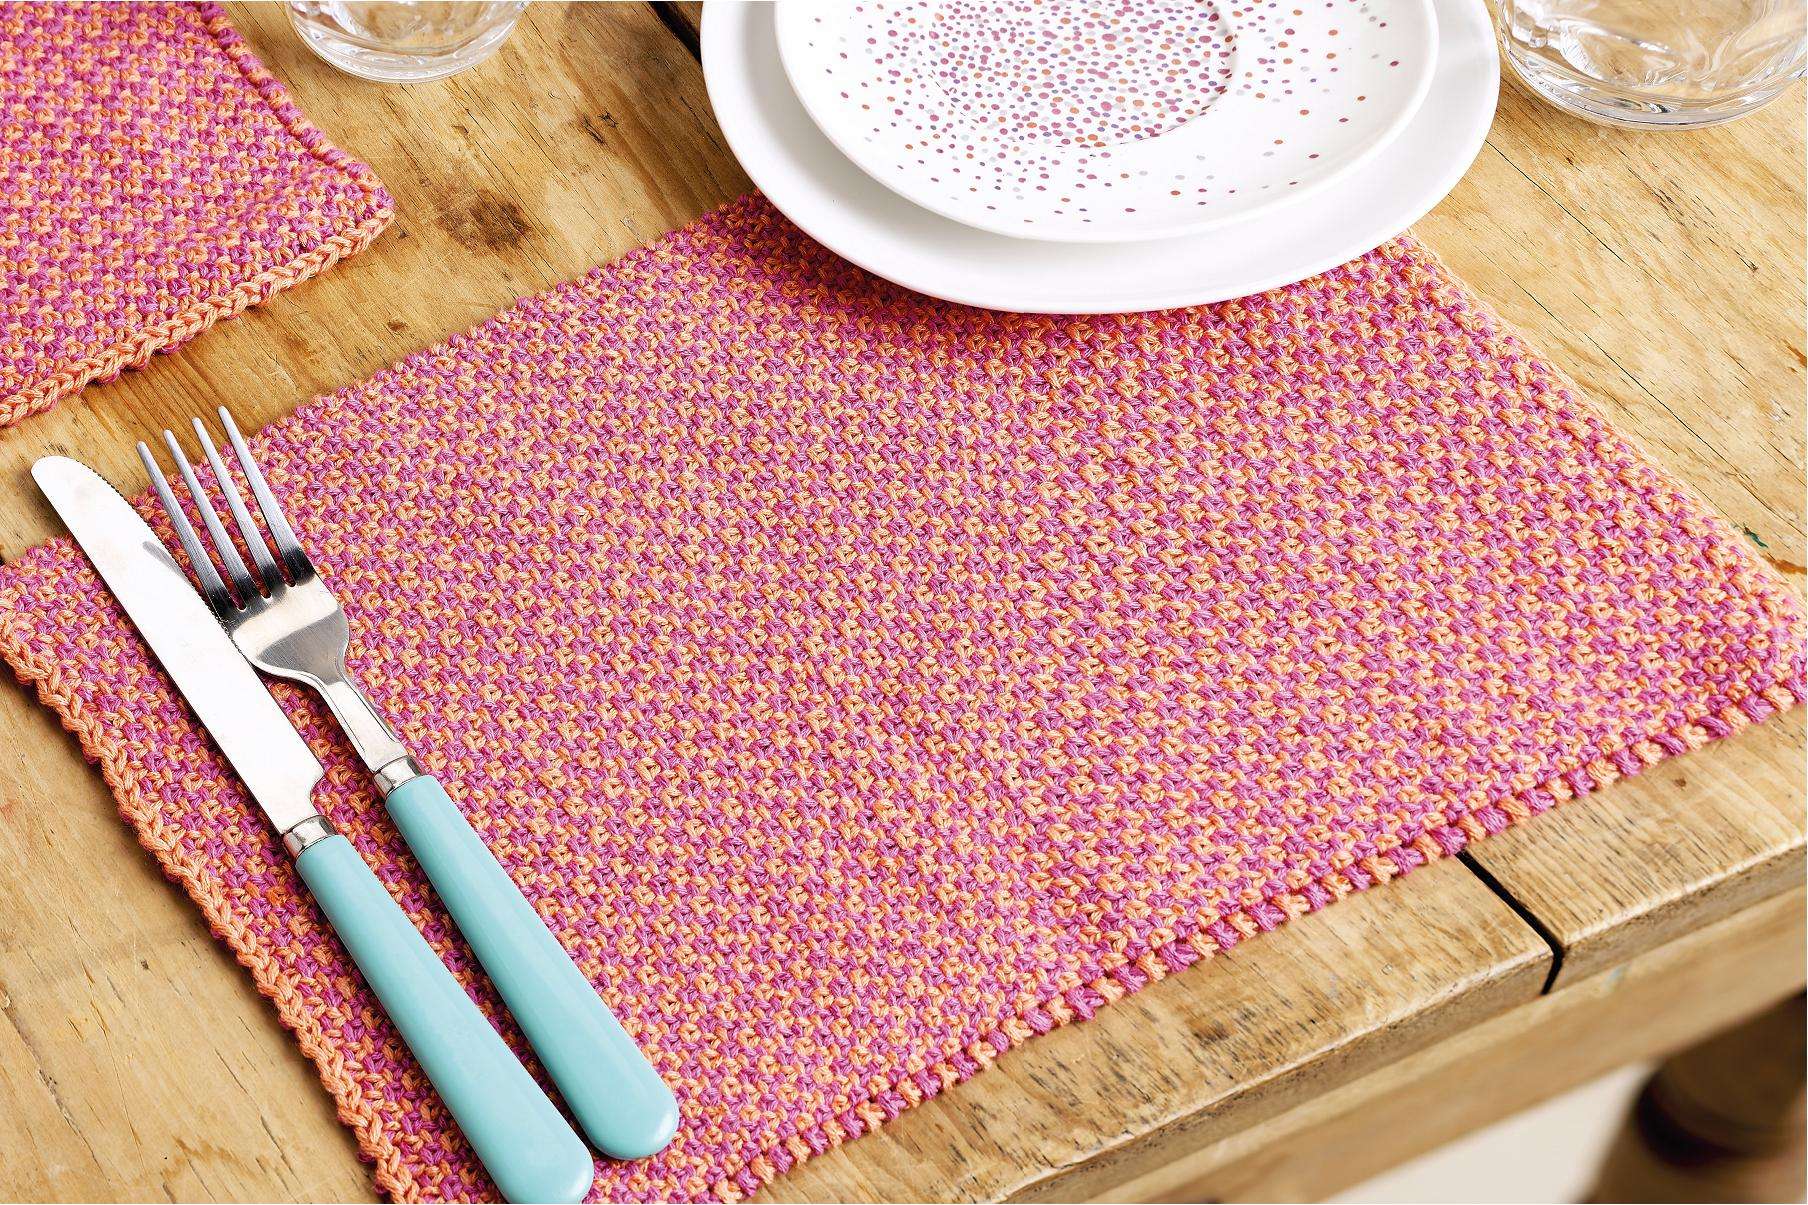 How To Knit A Placemat For Beginners